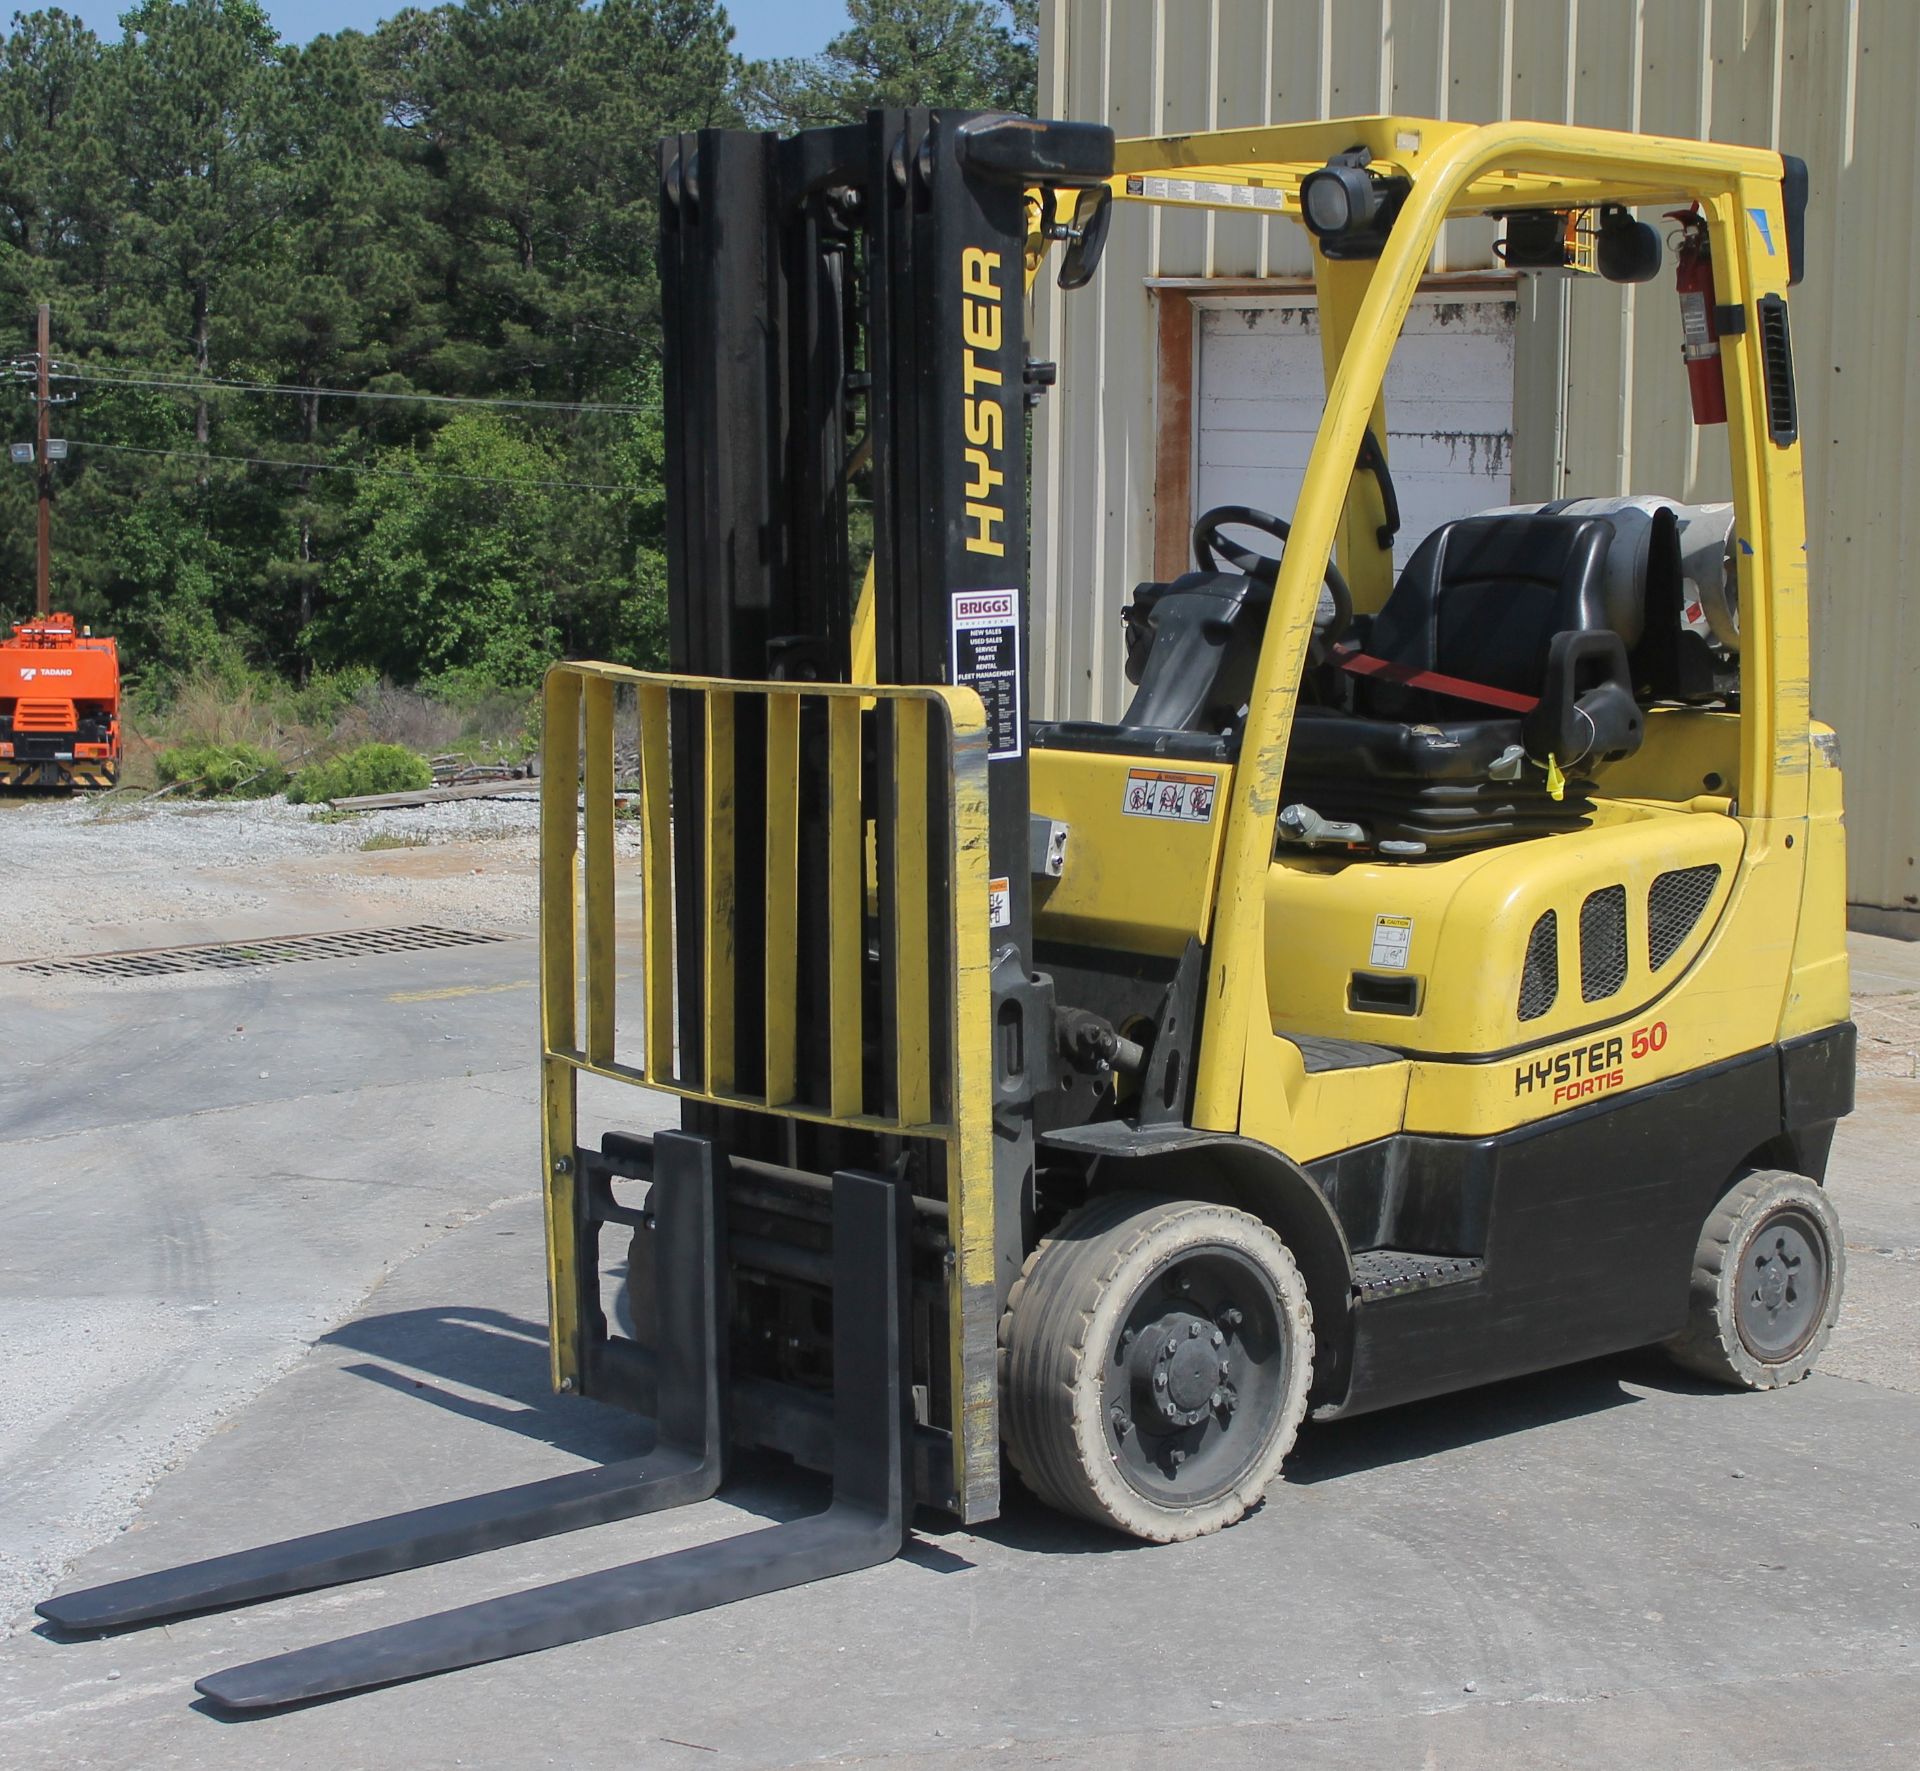 2012 HYSTER 5000 LB CAPACITY PROPANE FORKLIFT, 3 STAGE MAST (CHECK VIDEO)